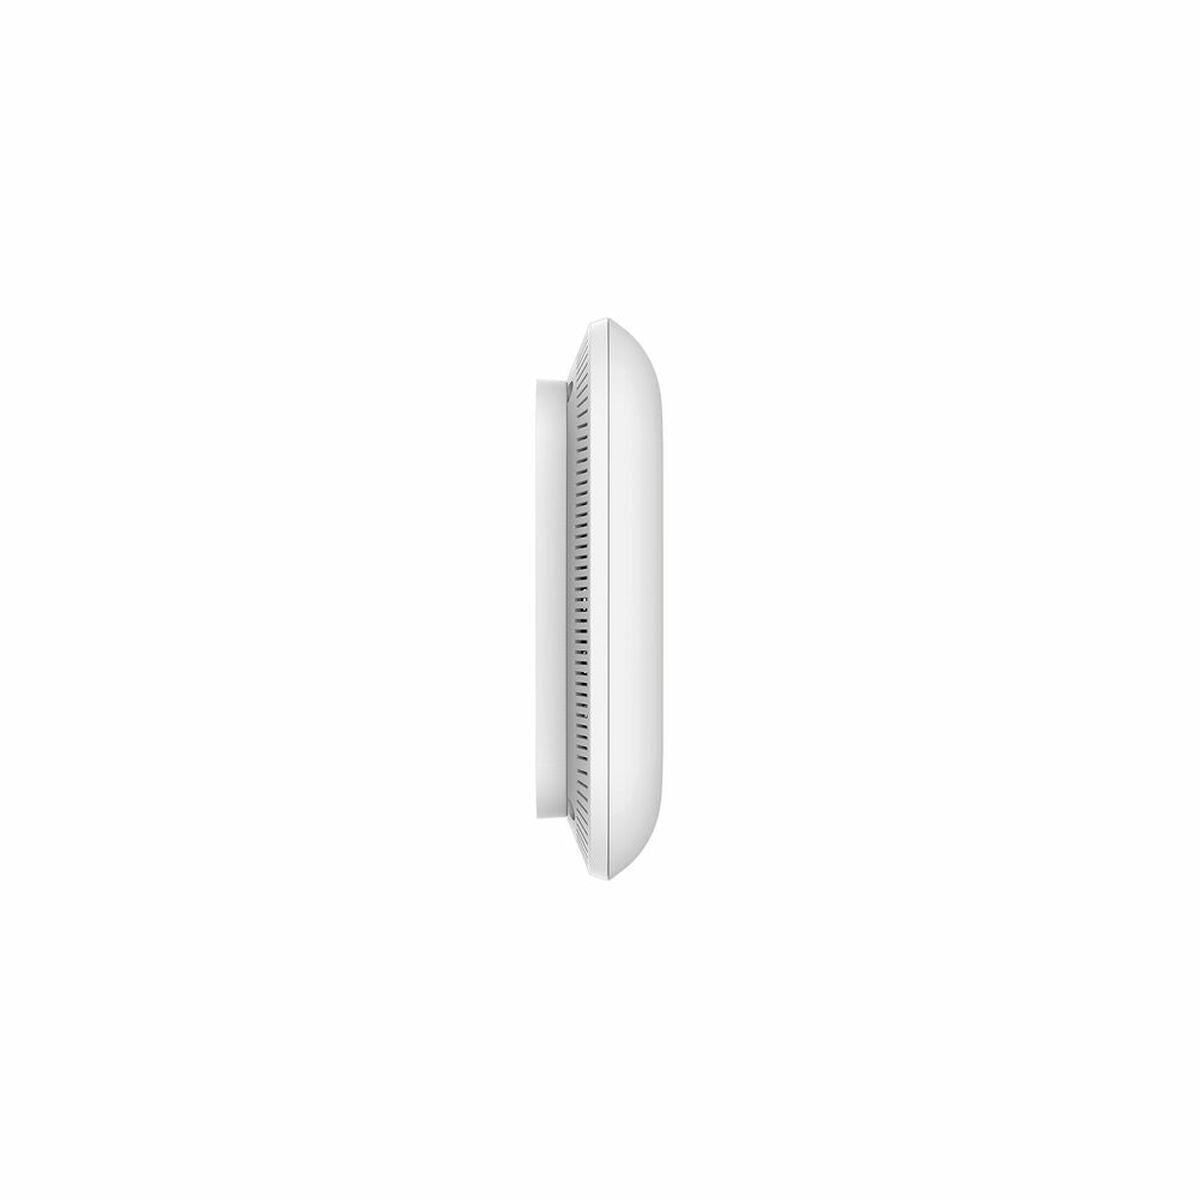 Access point D-Link AC1200 White